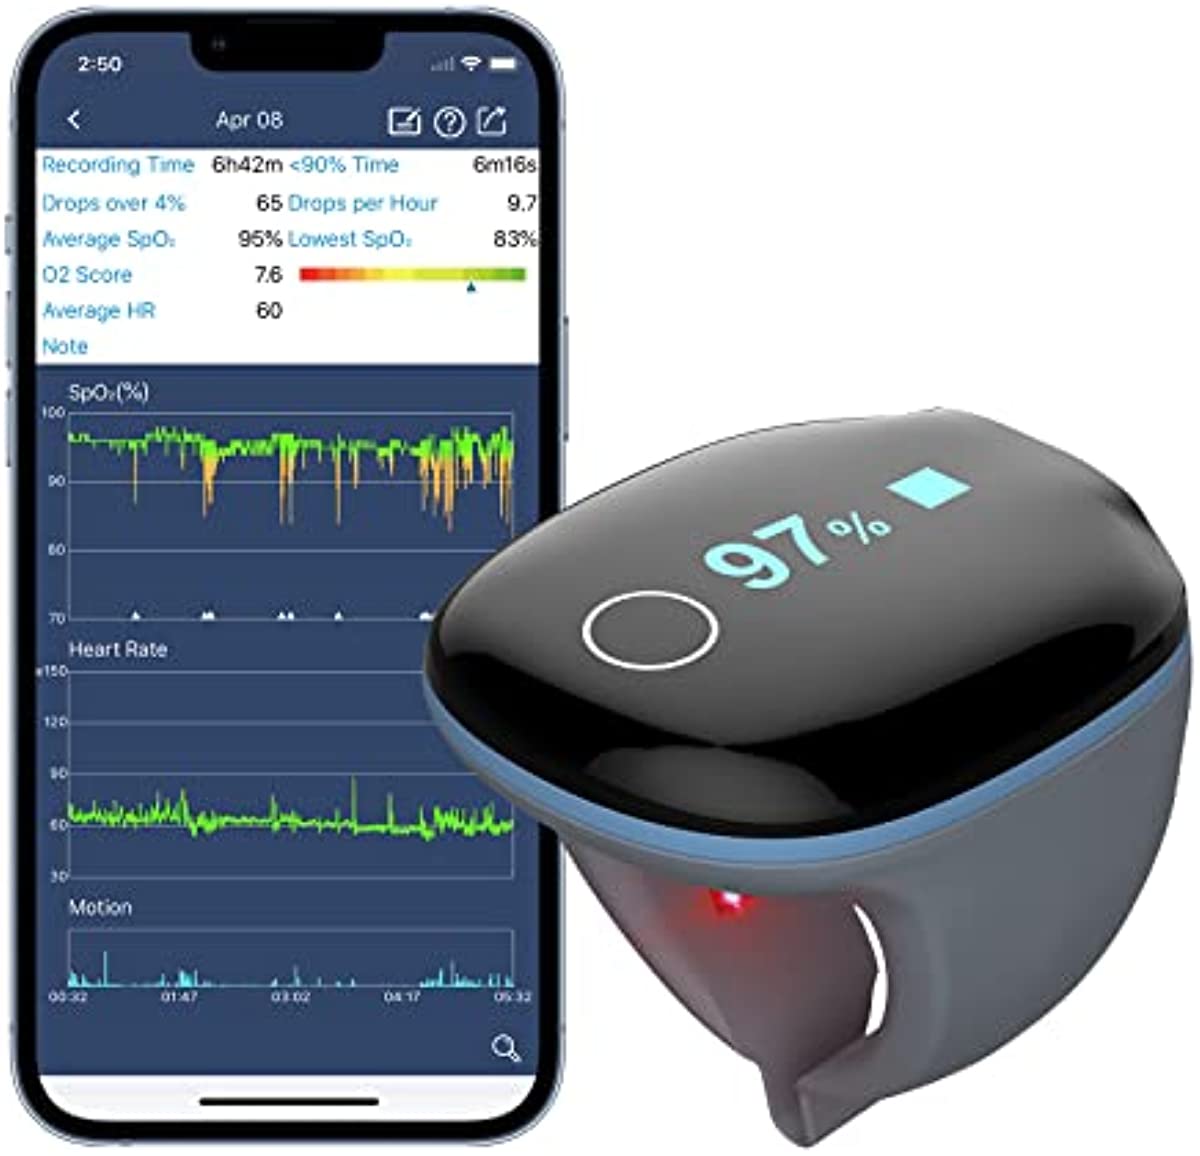 Wellue O2Ring Oxygen Monitor with Vibration Alarm - Bluetooth Sleep O2 Pulse Oximeter Rechargeable, Continuous Recording of SpO2 & PR Overnight, Sleep Tracker with Free APP & PC Reports